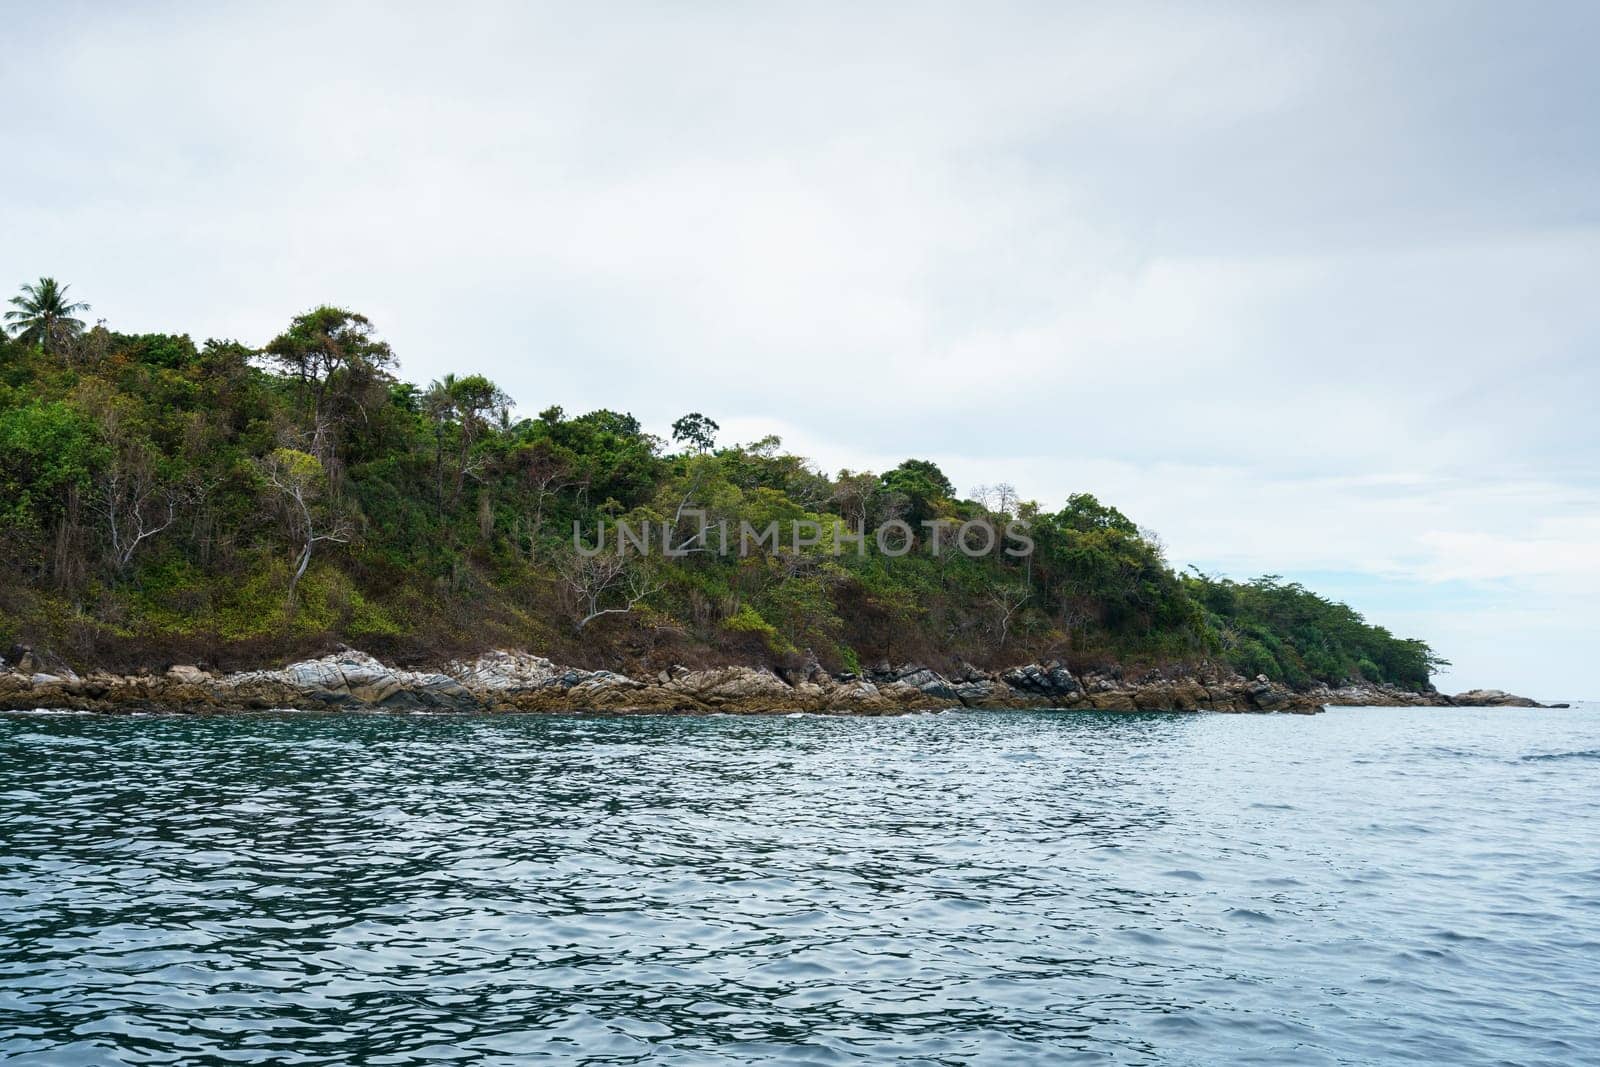 Seascape while boating. View of island coast by rivertime